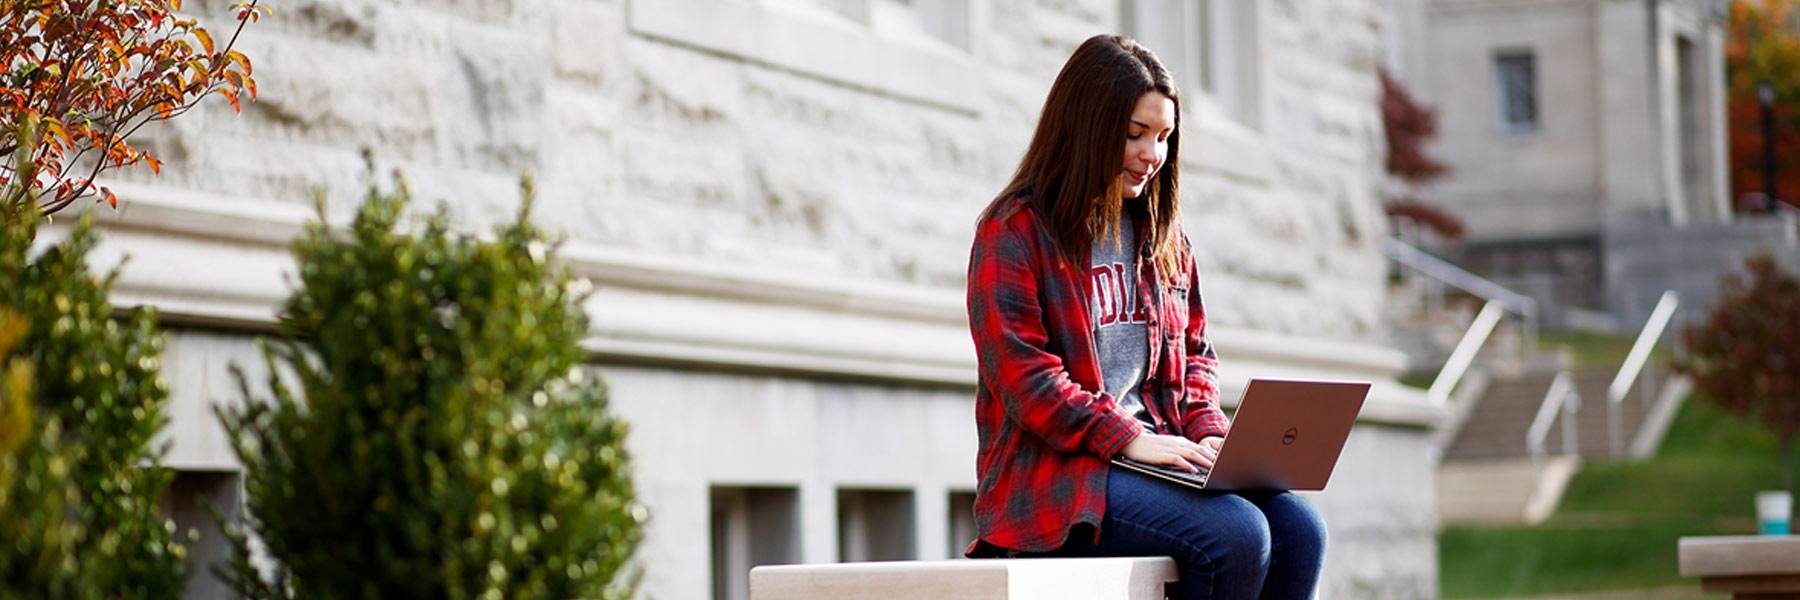 A woman sits on a stone bench outdoors and uses a laptop.